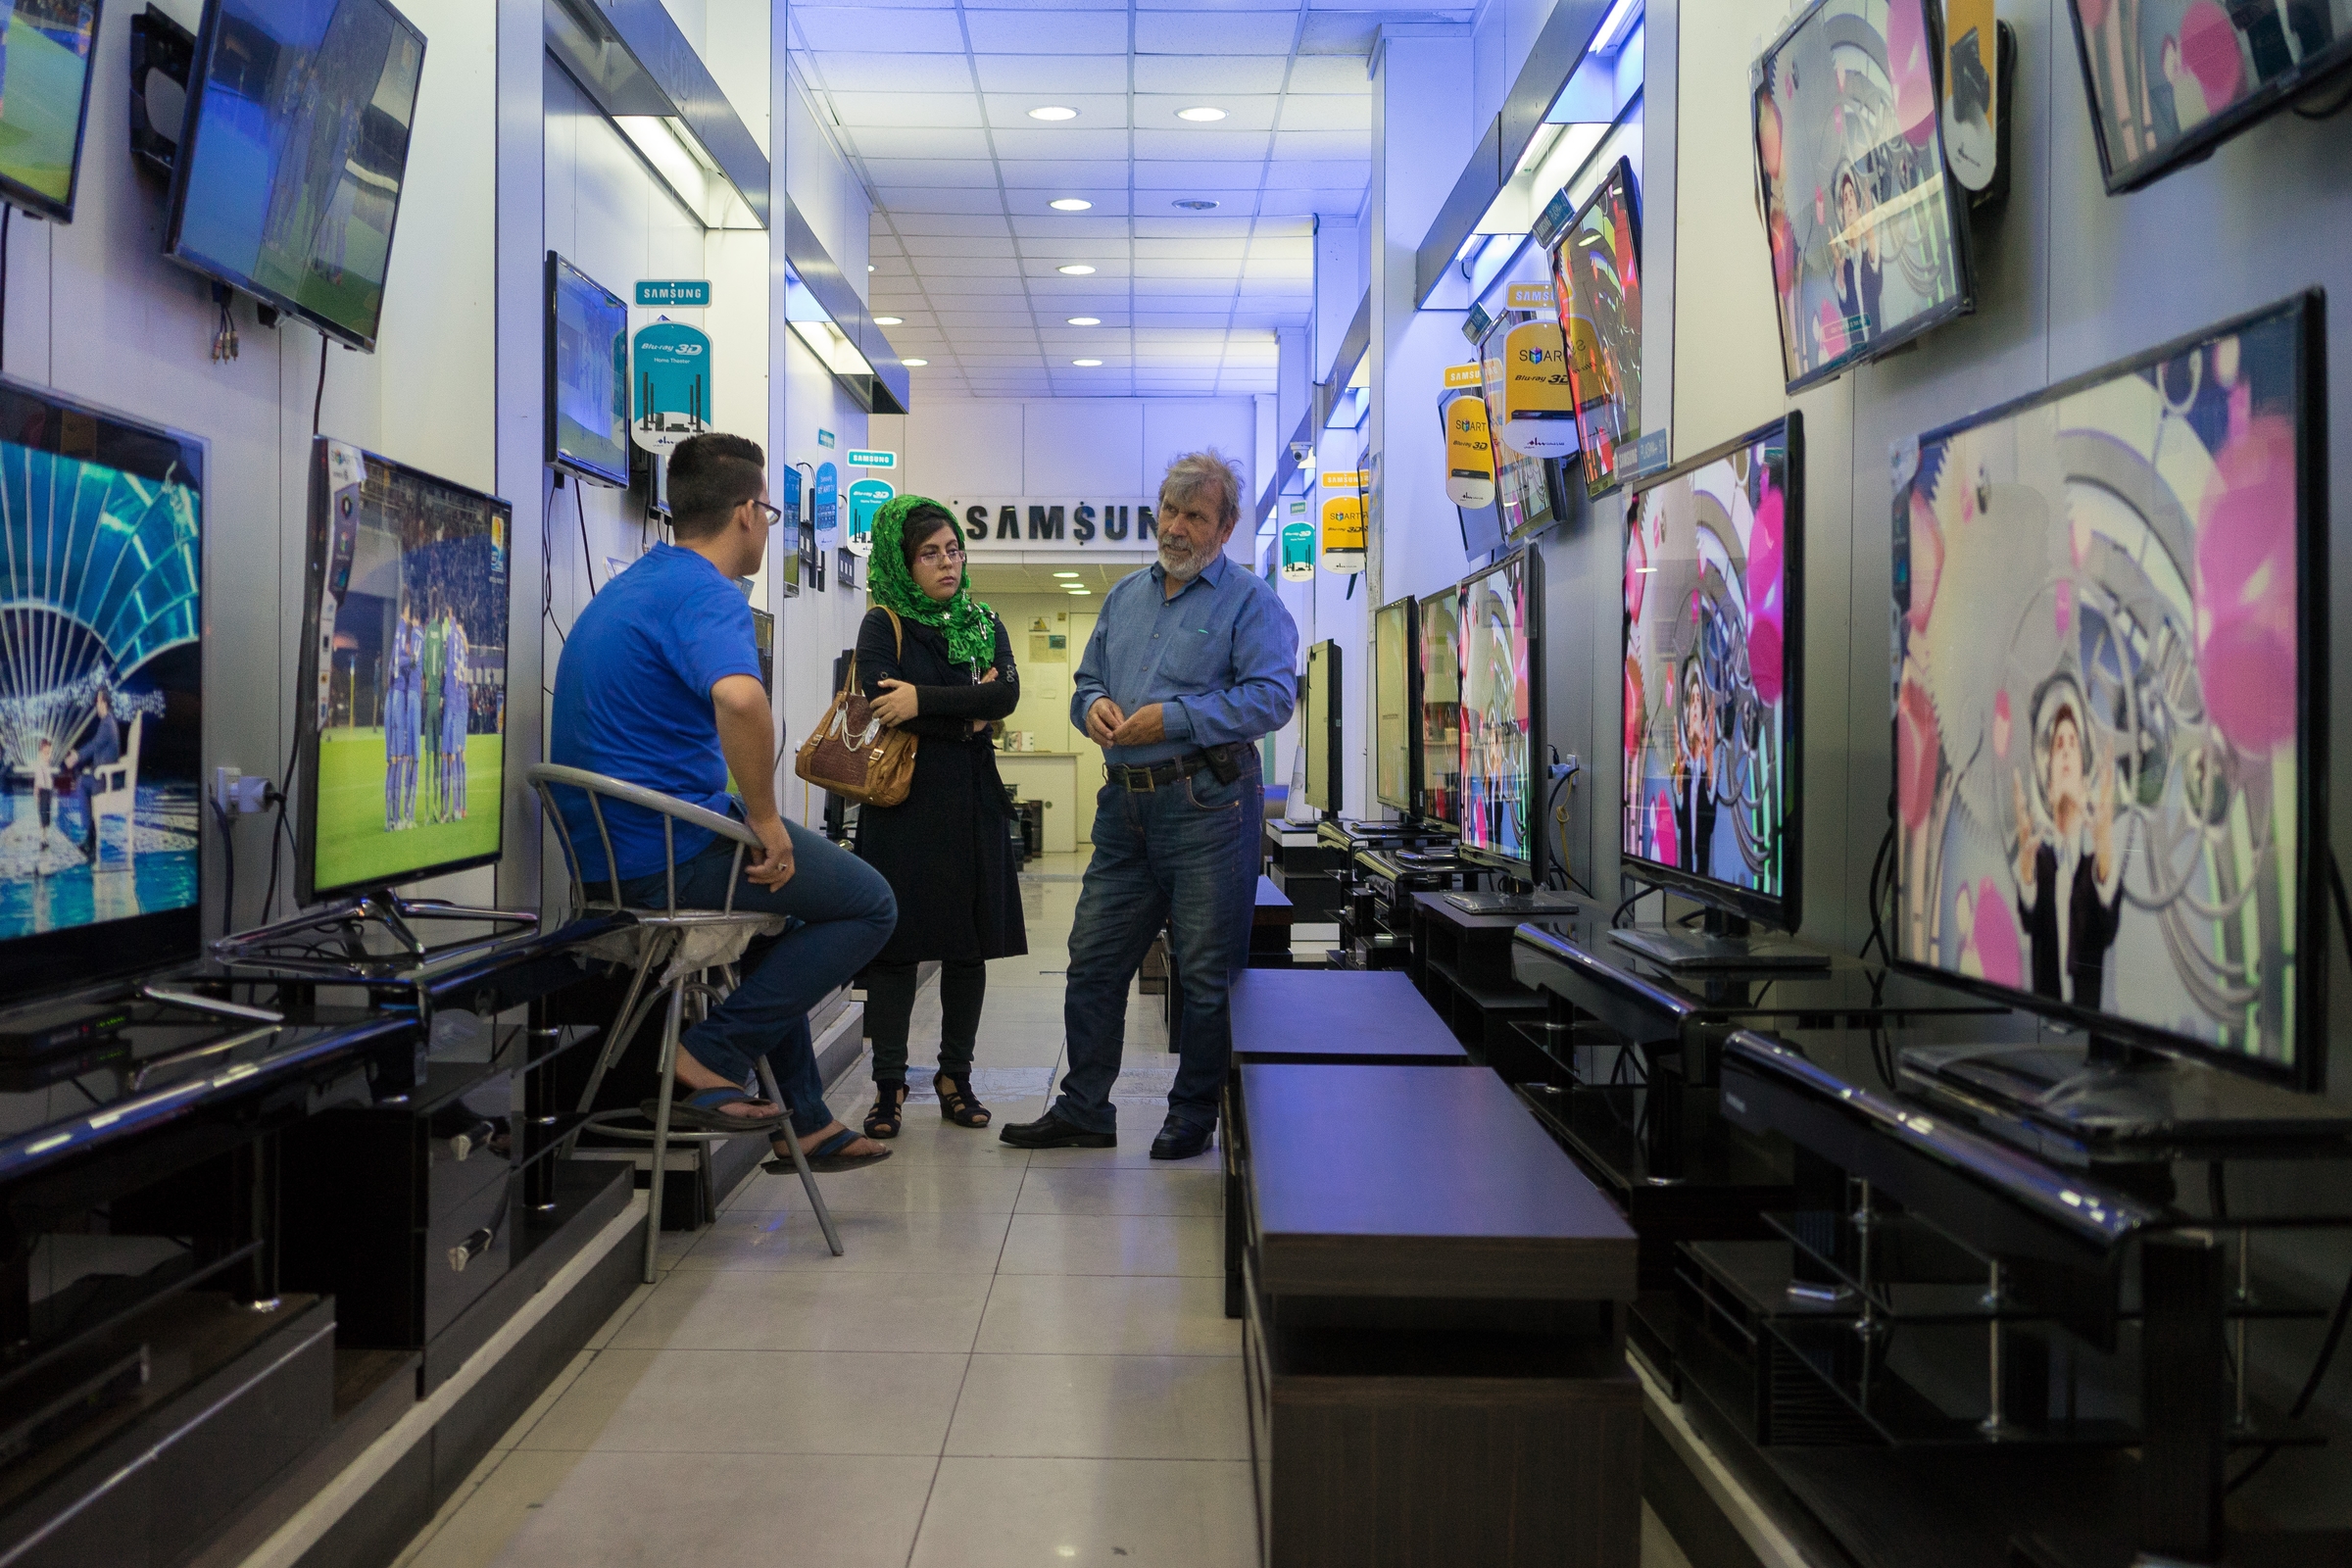  Samsung has emerged as the clear leader in Iran's consumer electronics market. It has overtaken Nokia in the mobile phone market and Panasonic in the television market following an aggressive push to bring a branded store experience to Iran.&nbsp; 